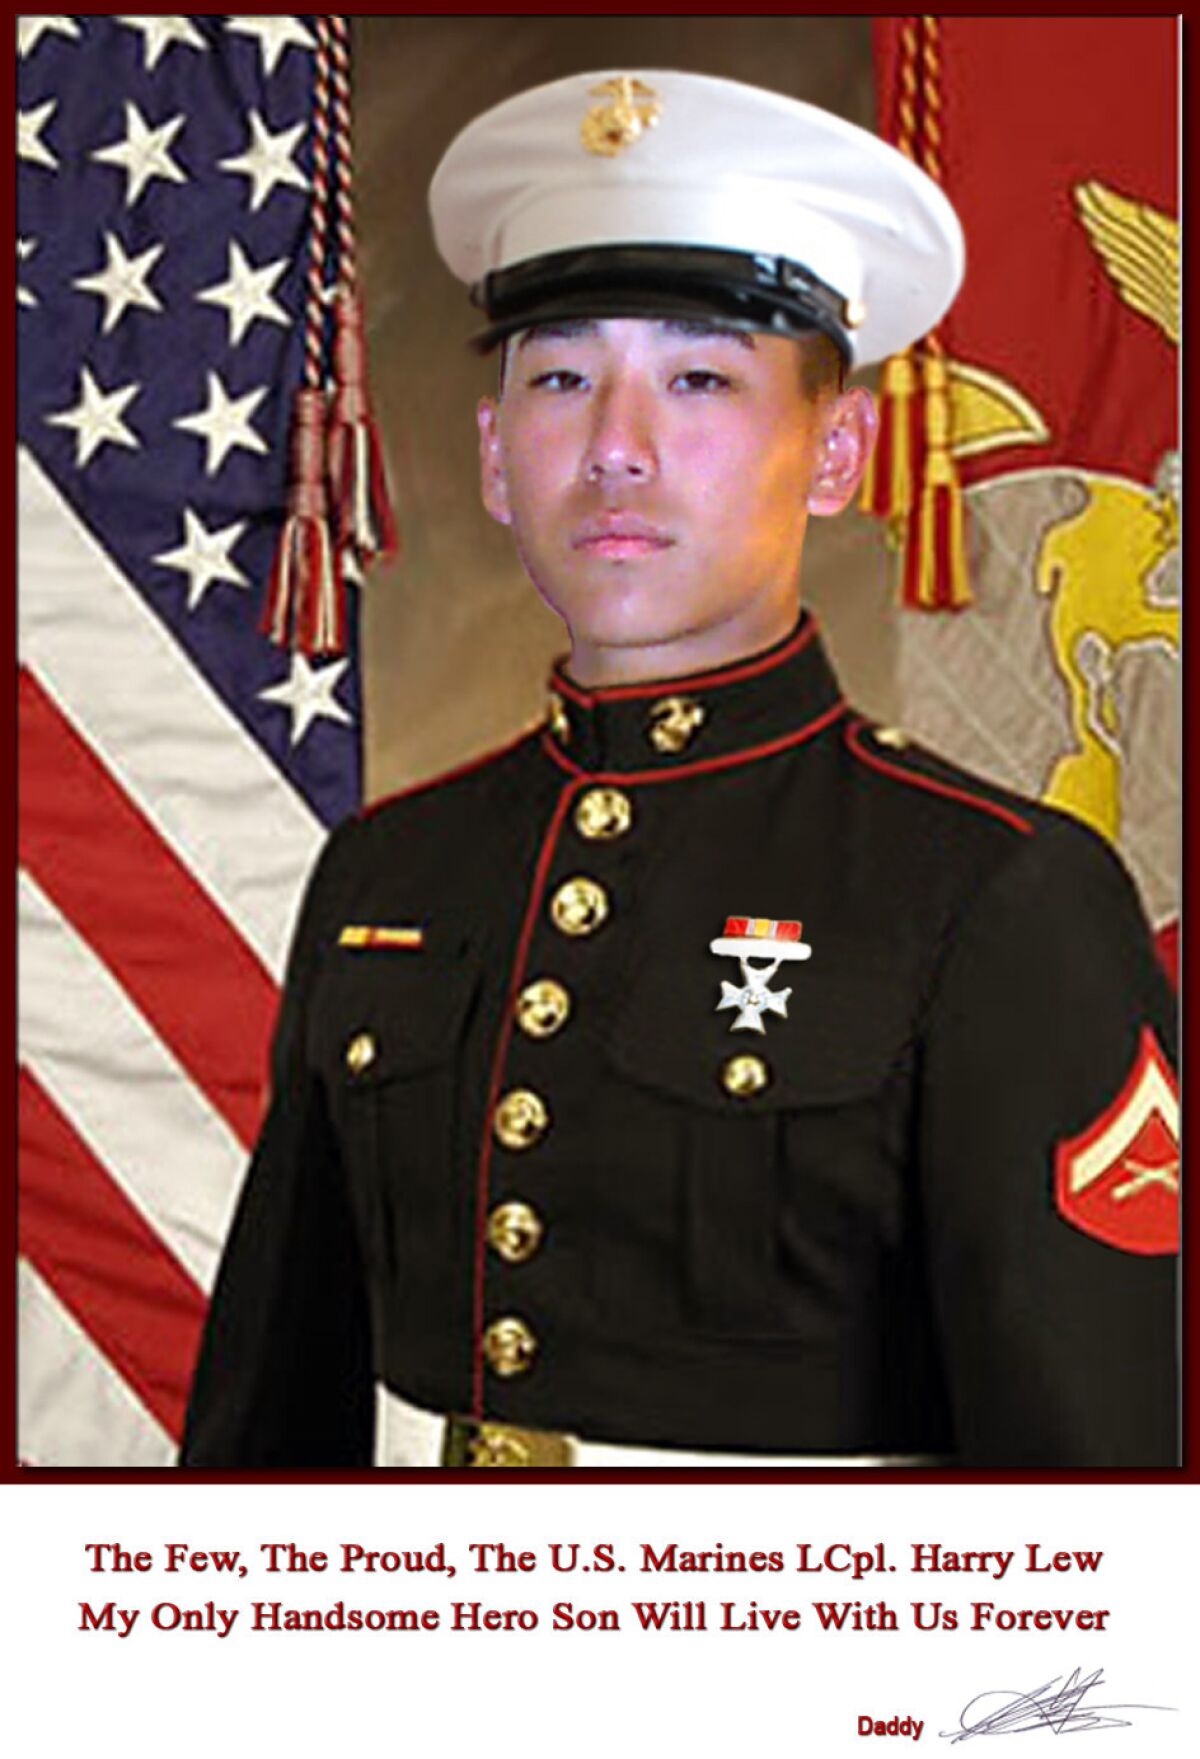 Lance Cpl. Harry Lew in a photo provided by his family.